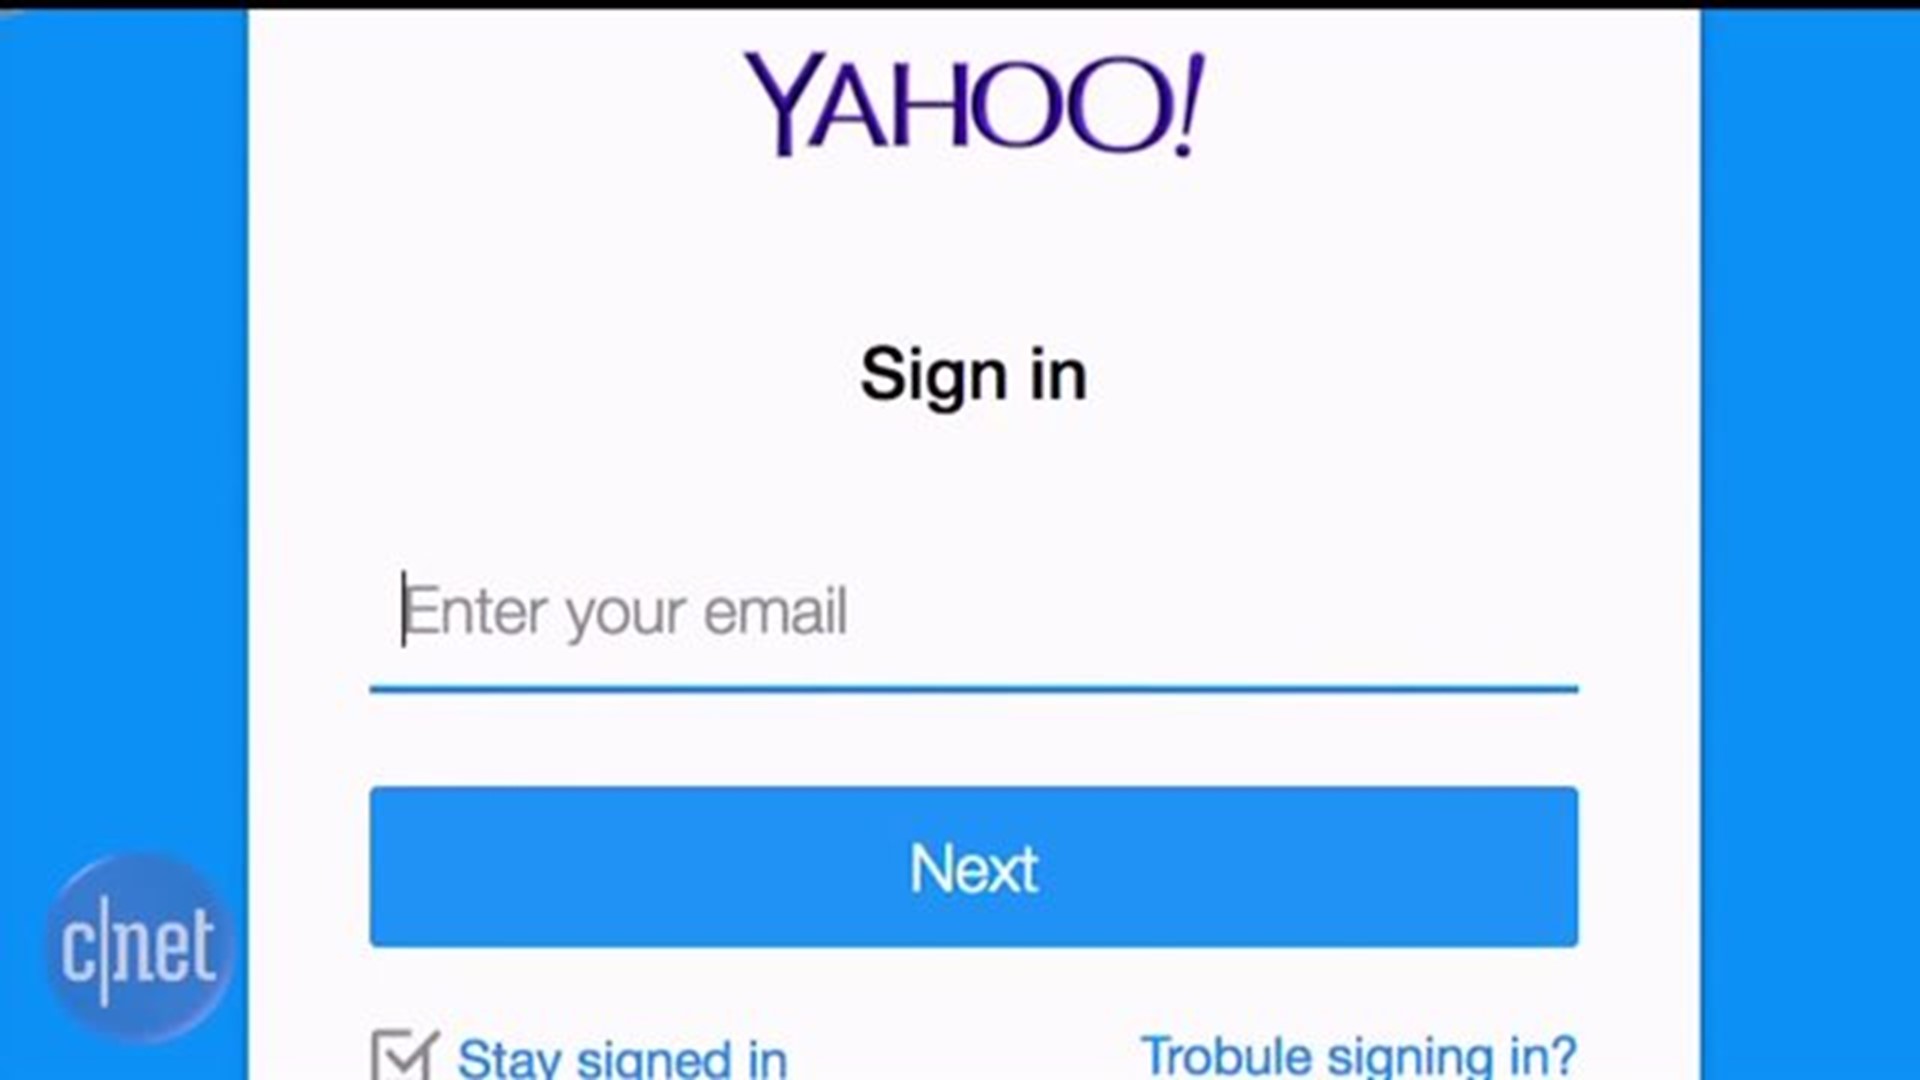 What hackers may have gotten from Yahoo accounts